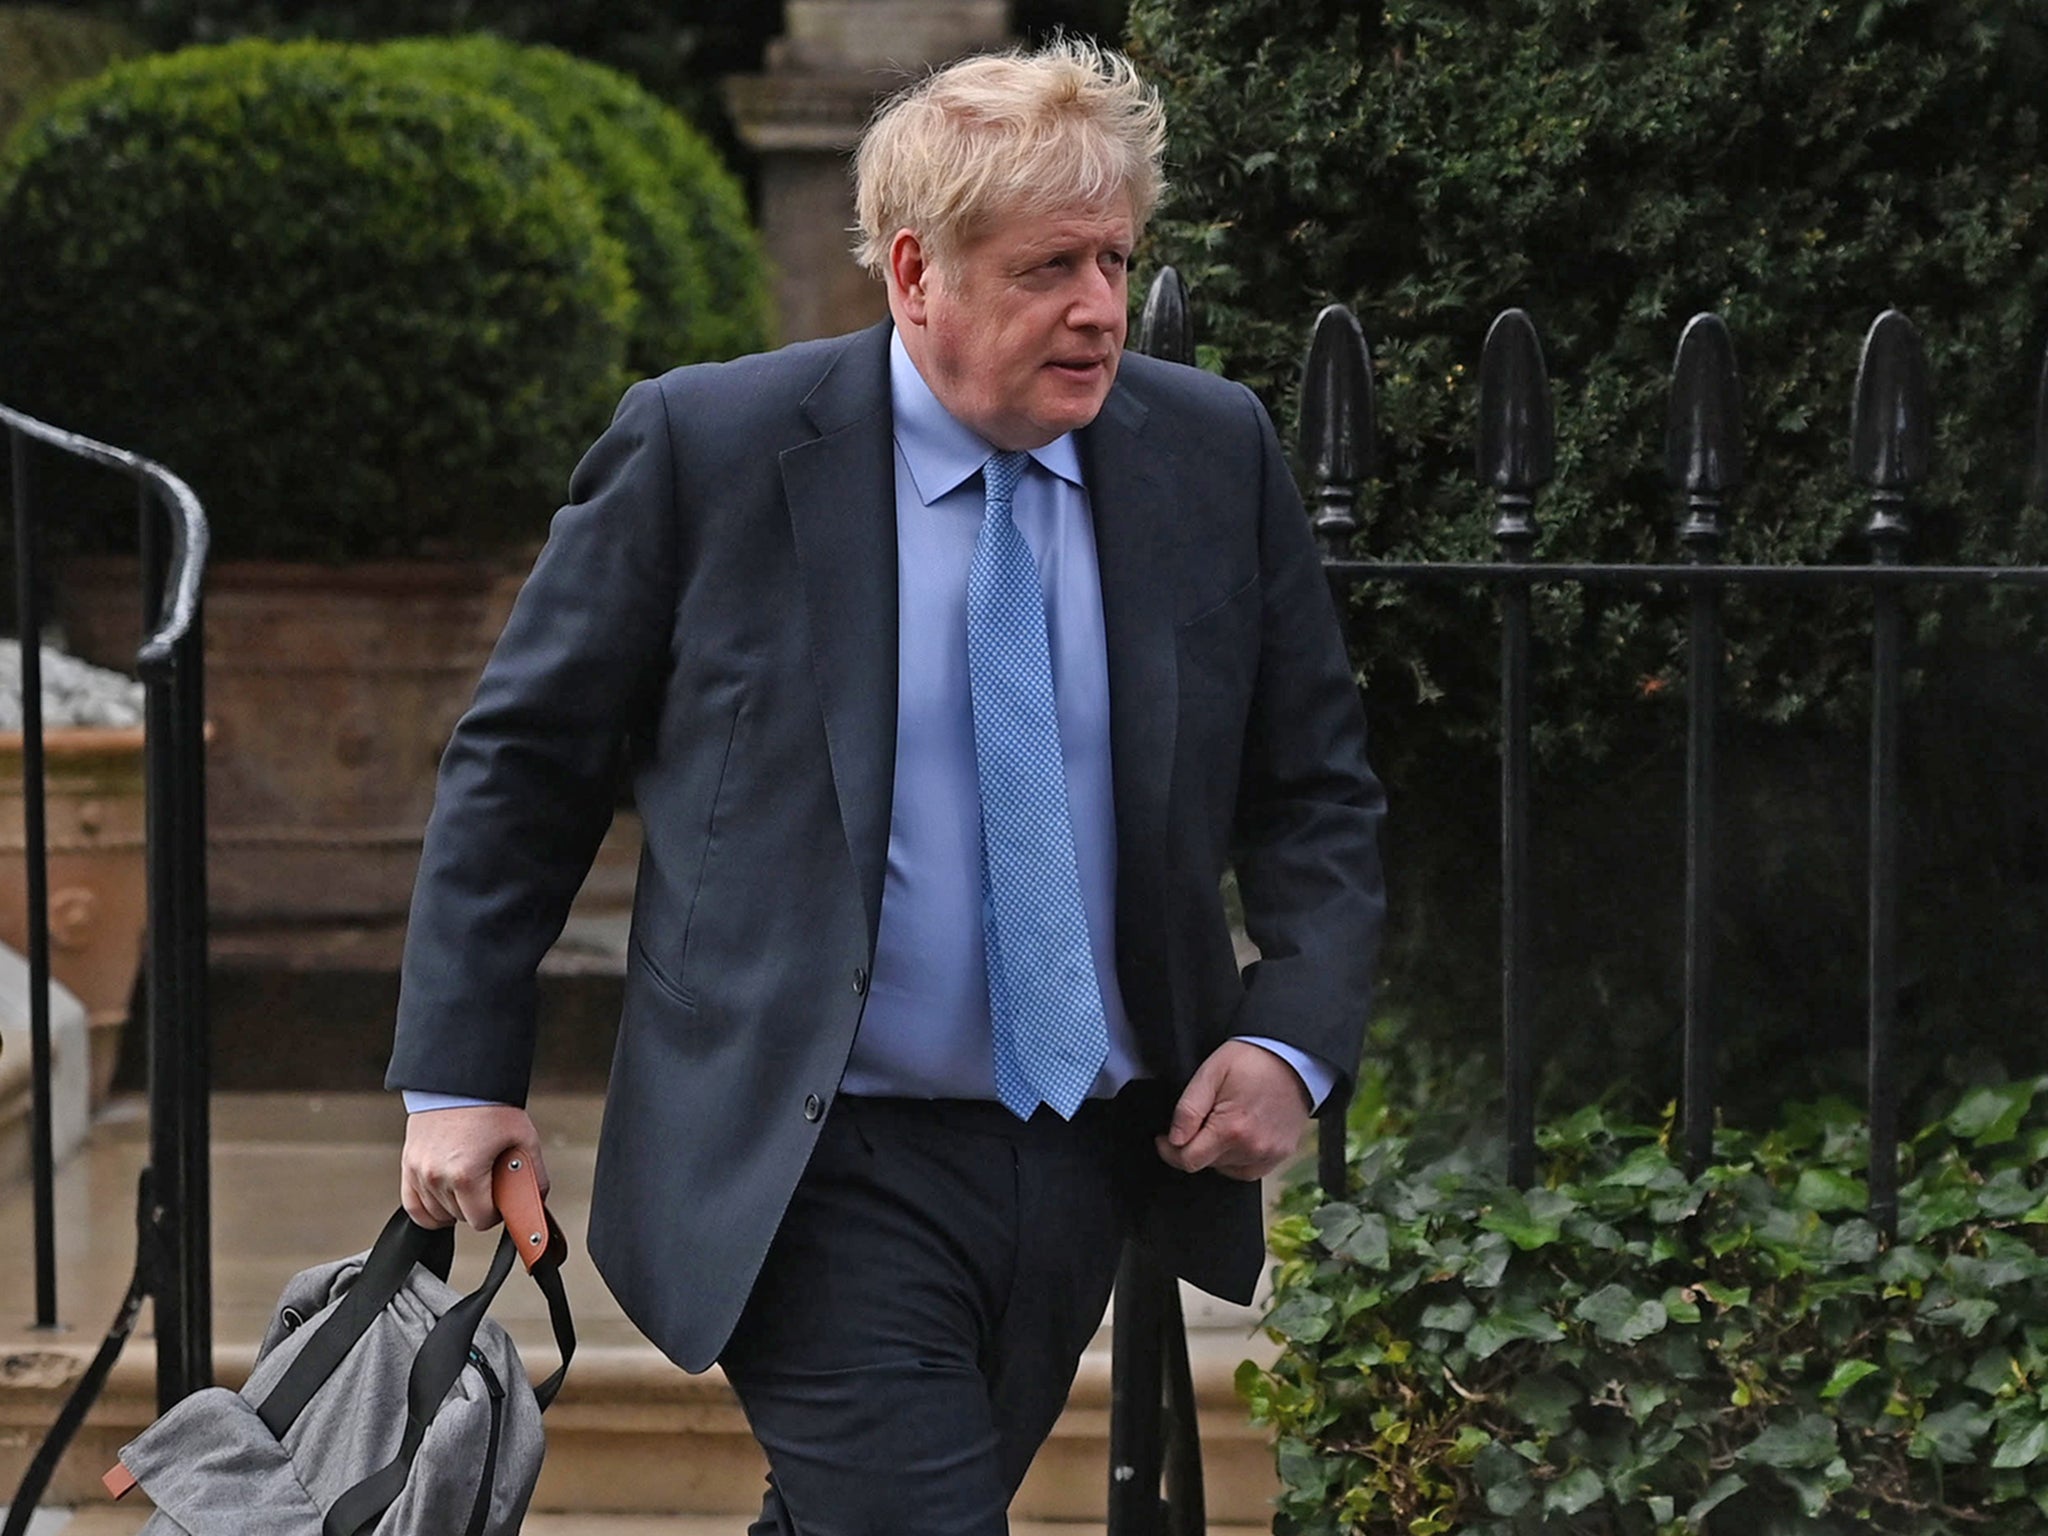 Boris Johnson, Dominic Cummings and Matt Hancock are expected to give evidence at the inquiry